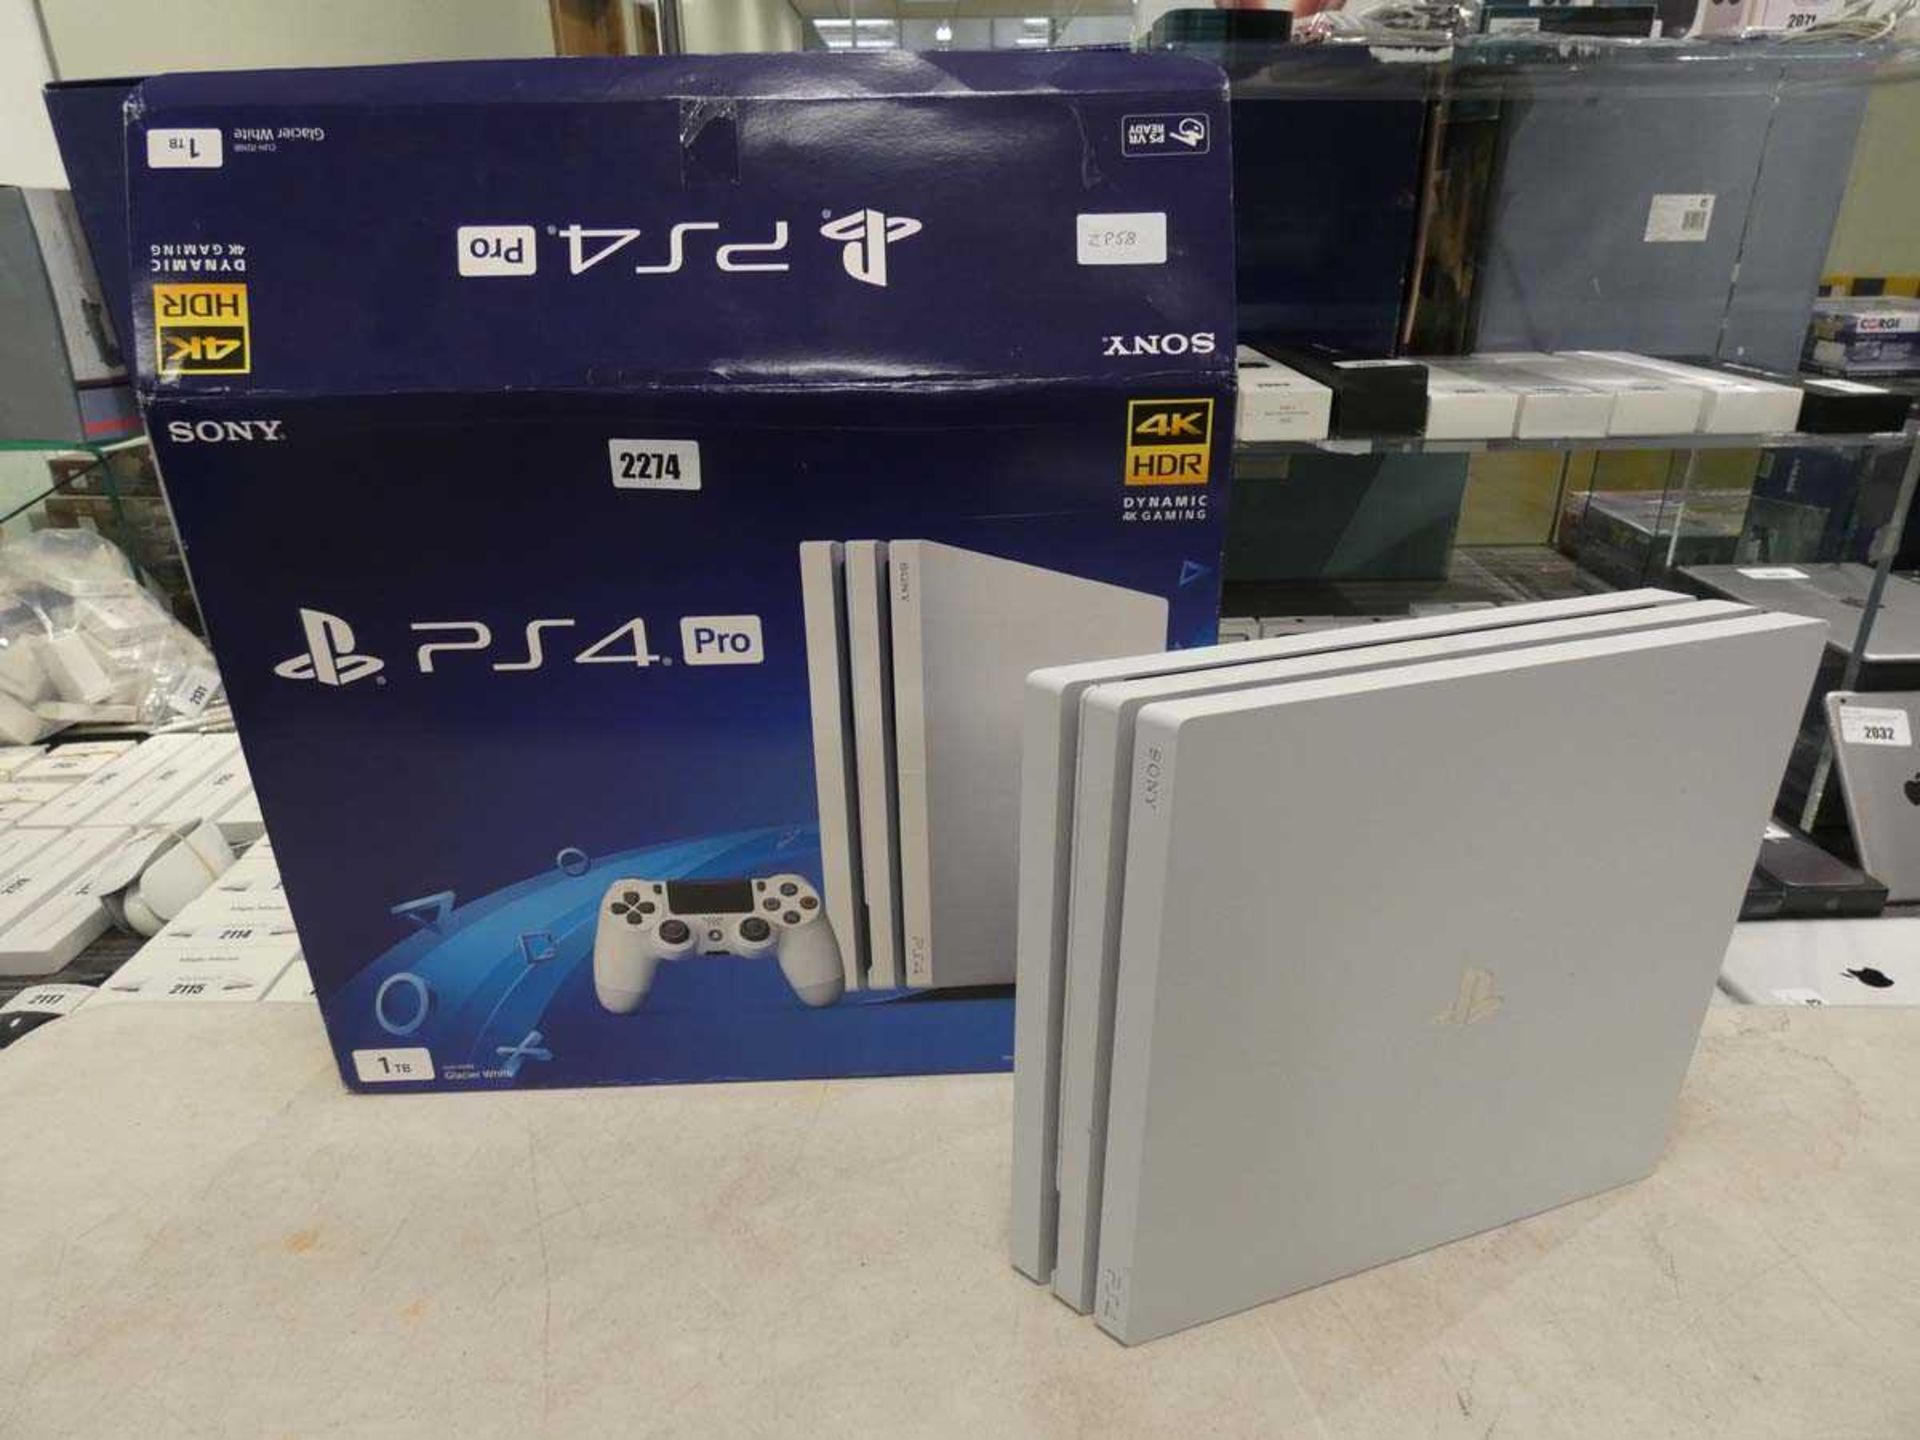 PlayStation 4 Pro with box